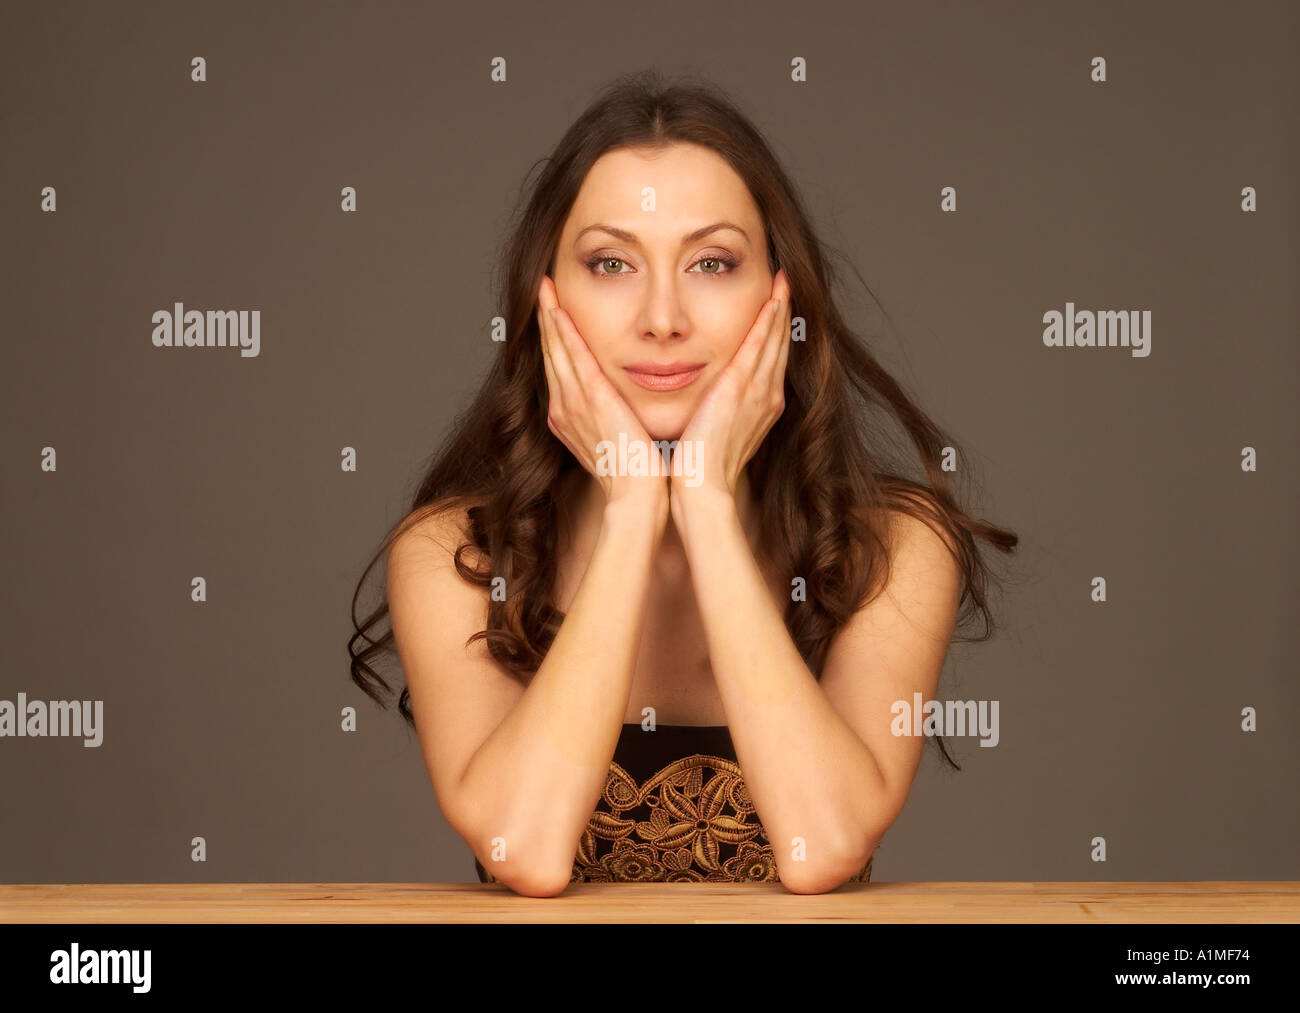 MR Beautiful woman leaning her face on her hands Stock Photo - Alamy